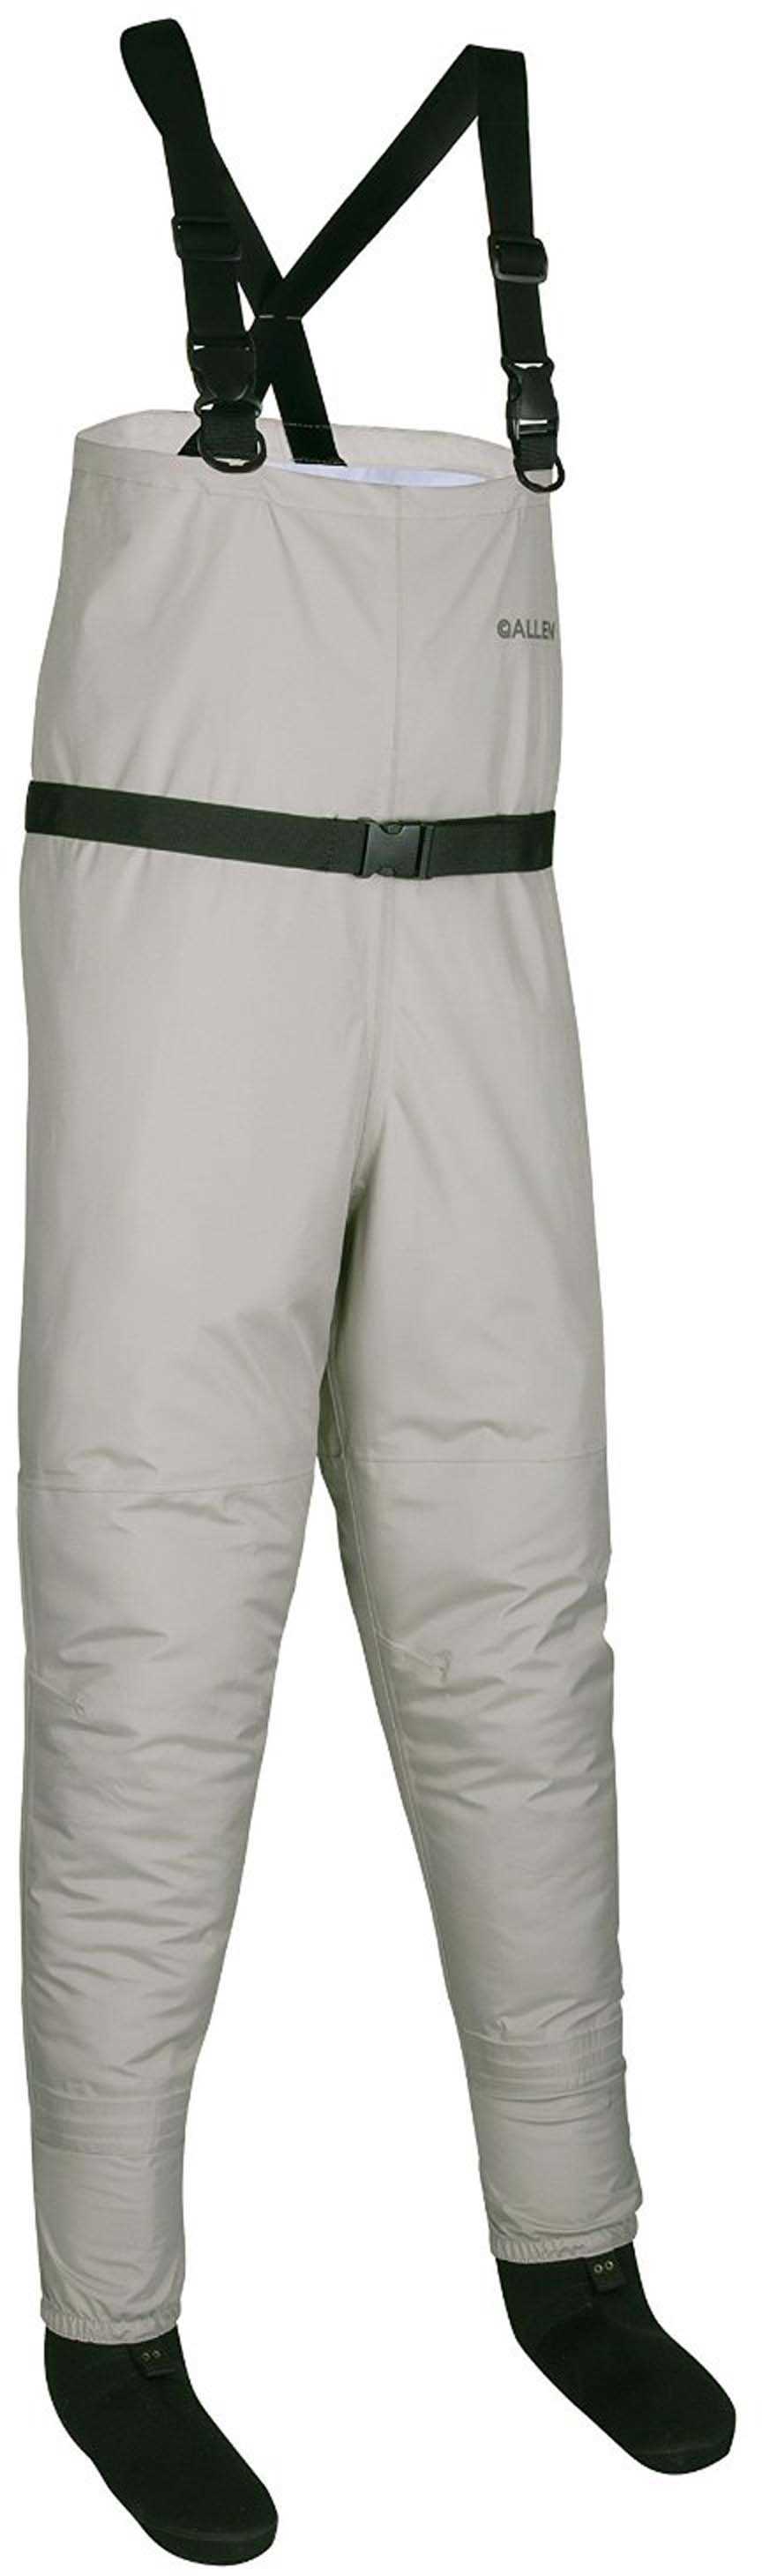 Allen Cases Antero Breathable Stockingfoot Wader-Stout X-Large Md: 18399